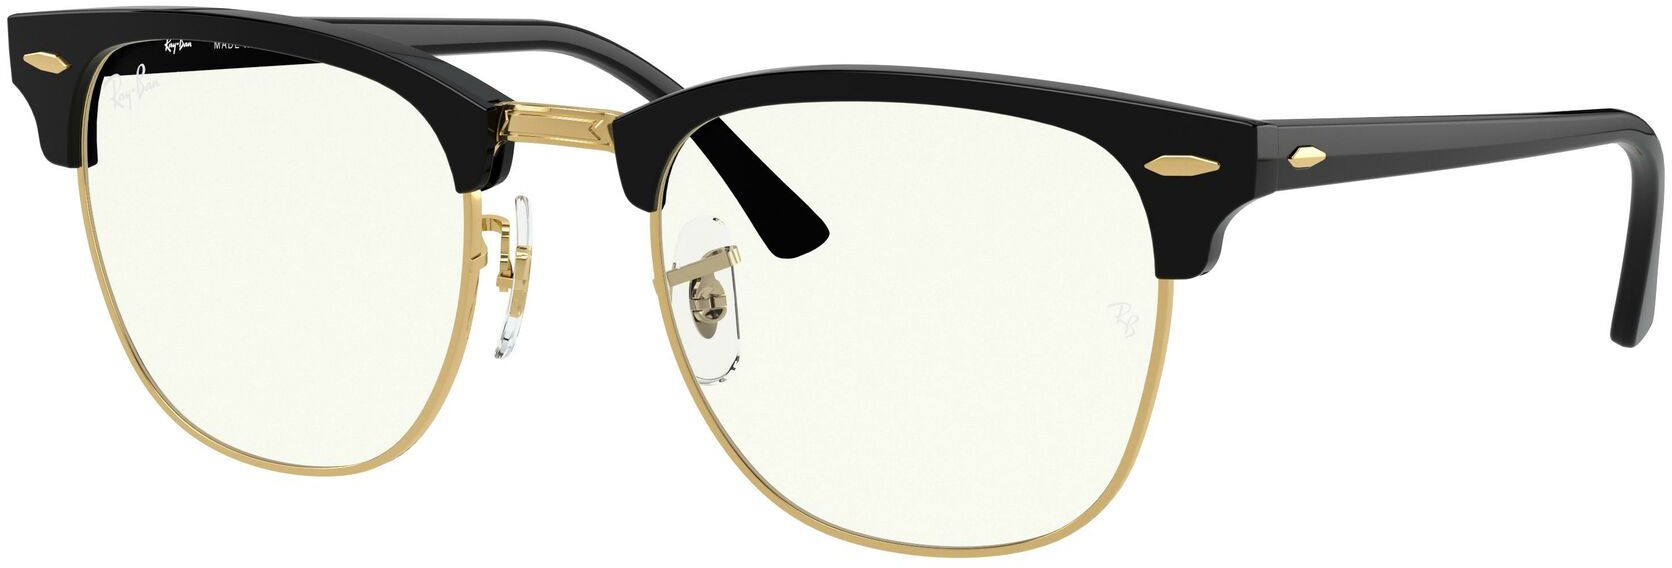 clear clubmaster sunglasses